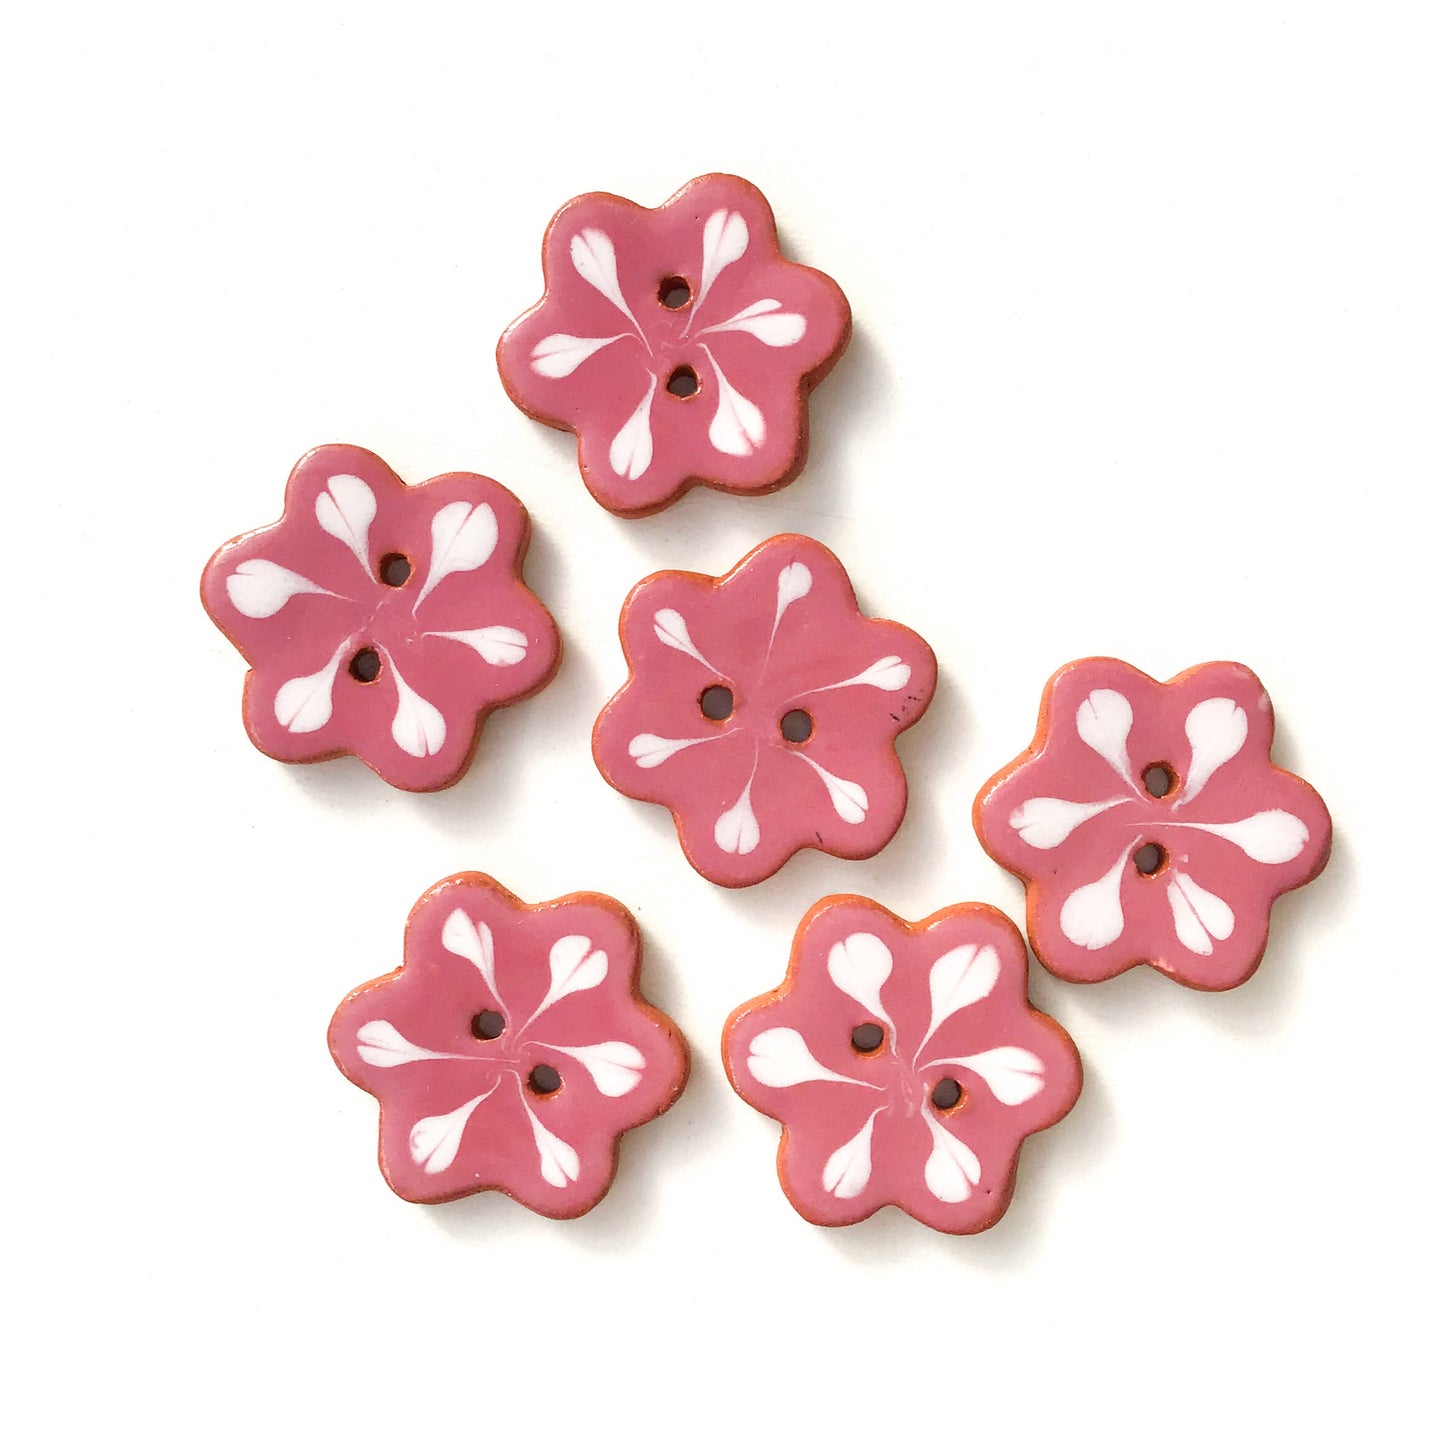 Mauve Flower Buttons with White Detail - Ceramic Flower Buttons - 7/8" - 6 Pack